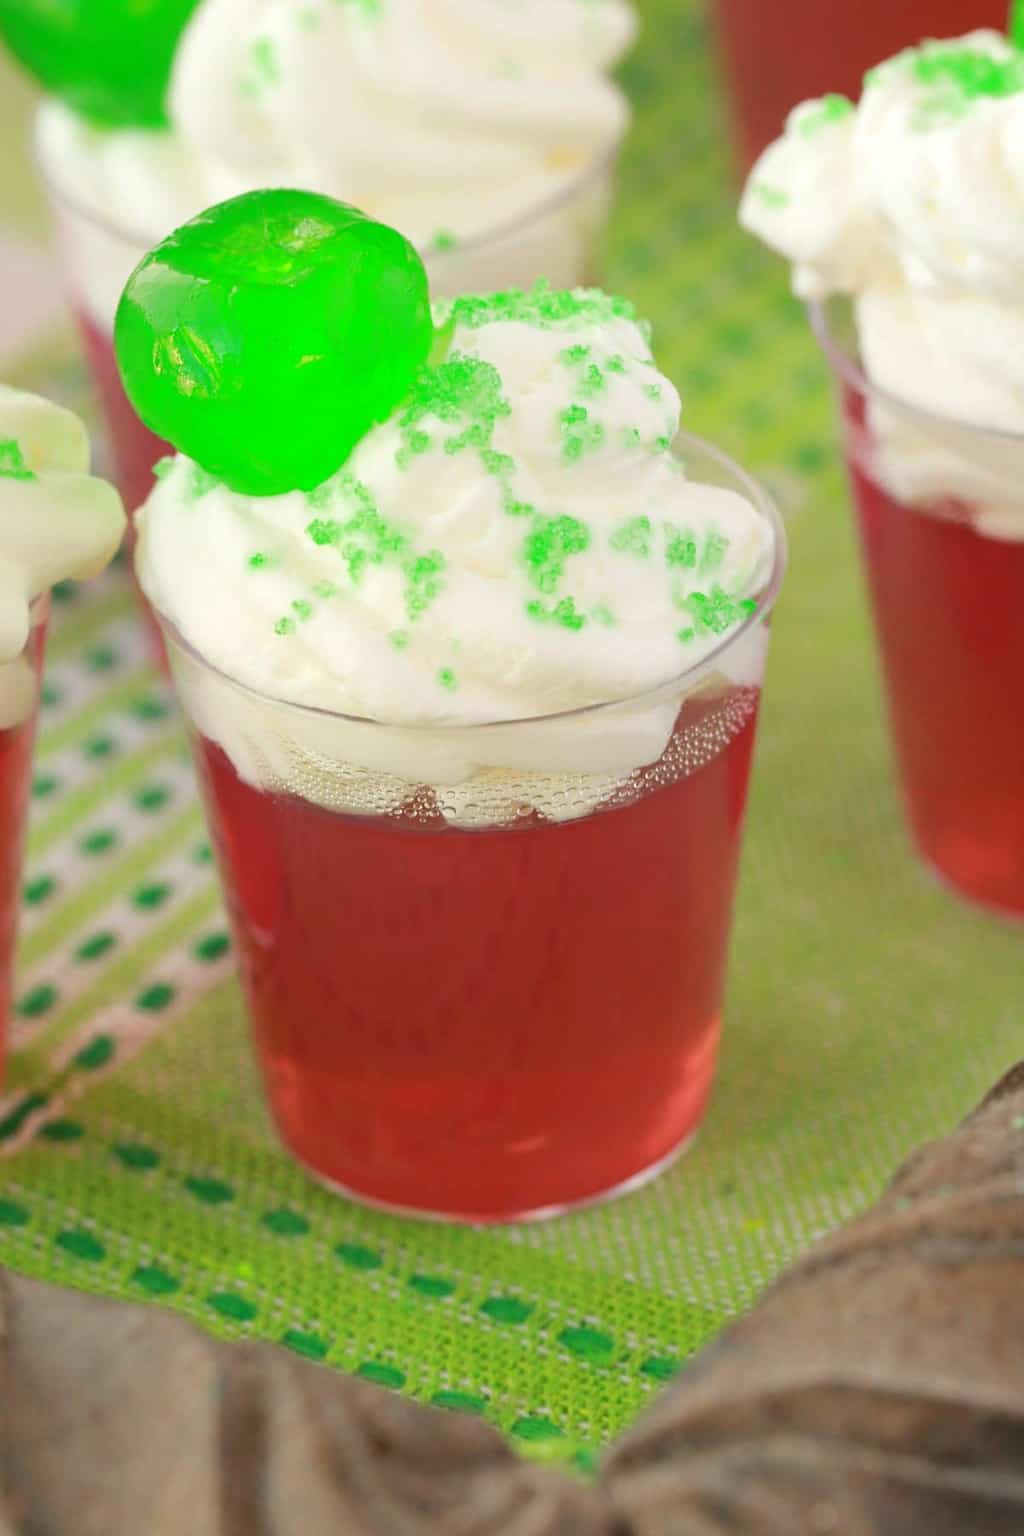 Vegan jello shots topped with vegan whipped cream, green sanding sugar and a green cherry. 